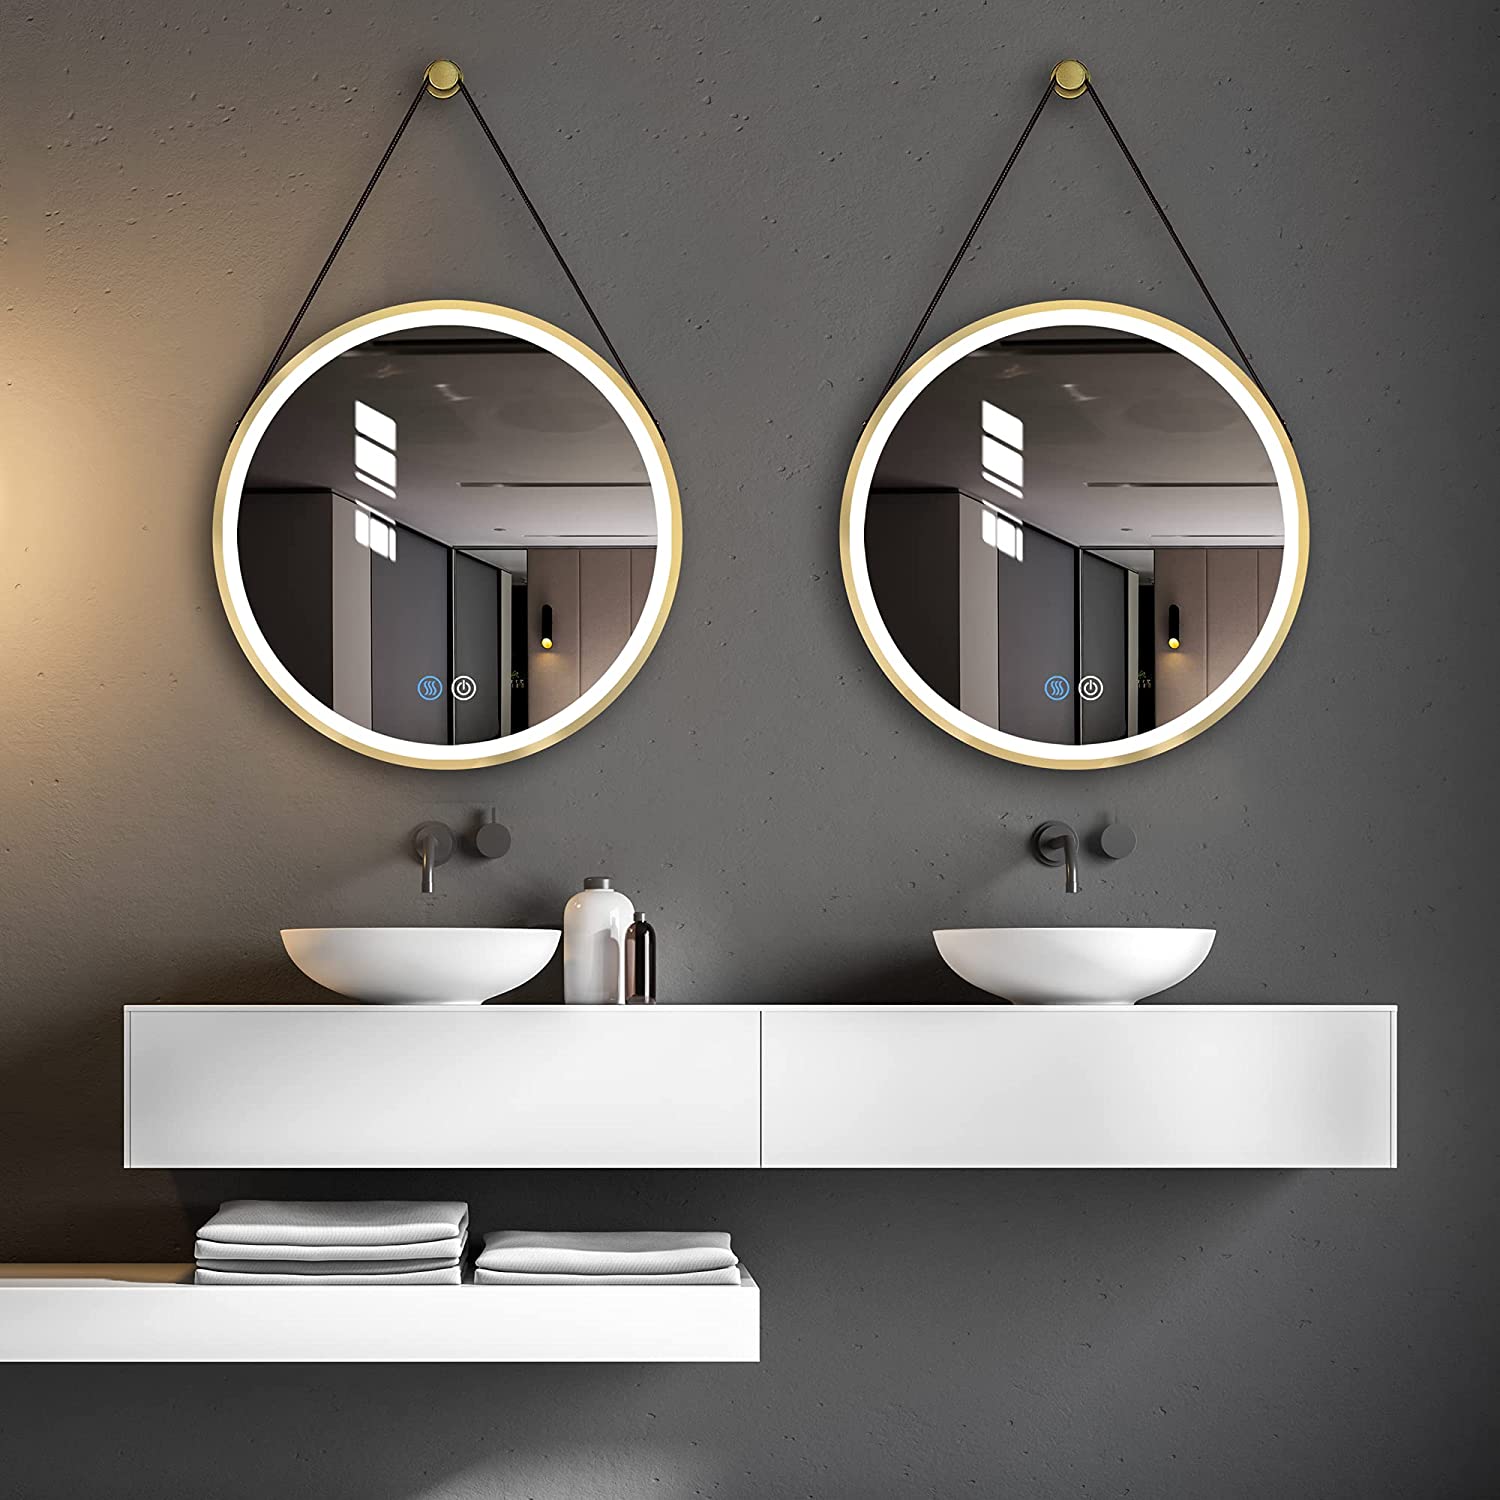 51 Bathroom Mirrors To Complete Your Stylish Vanity Setup - Are All Mirrors Suitable For Bathrooms